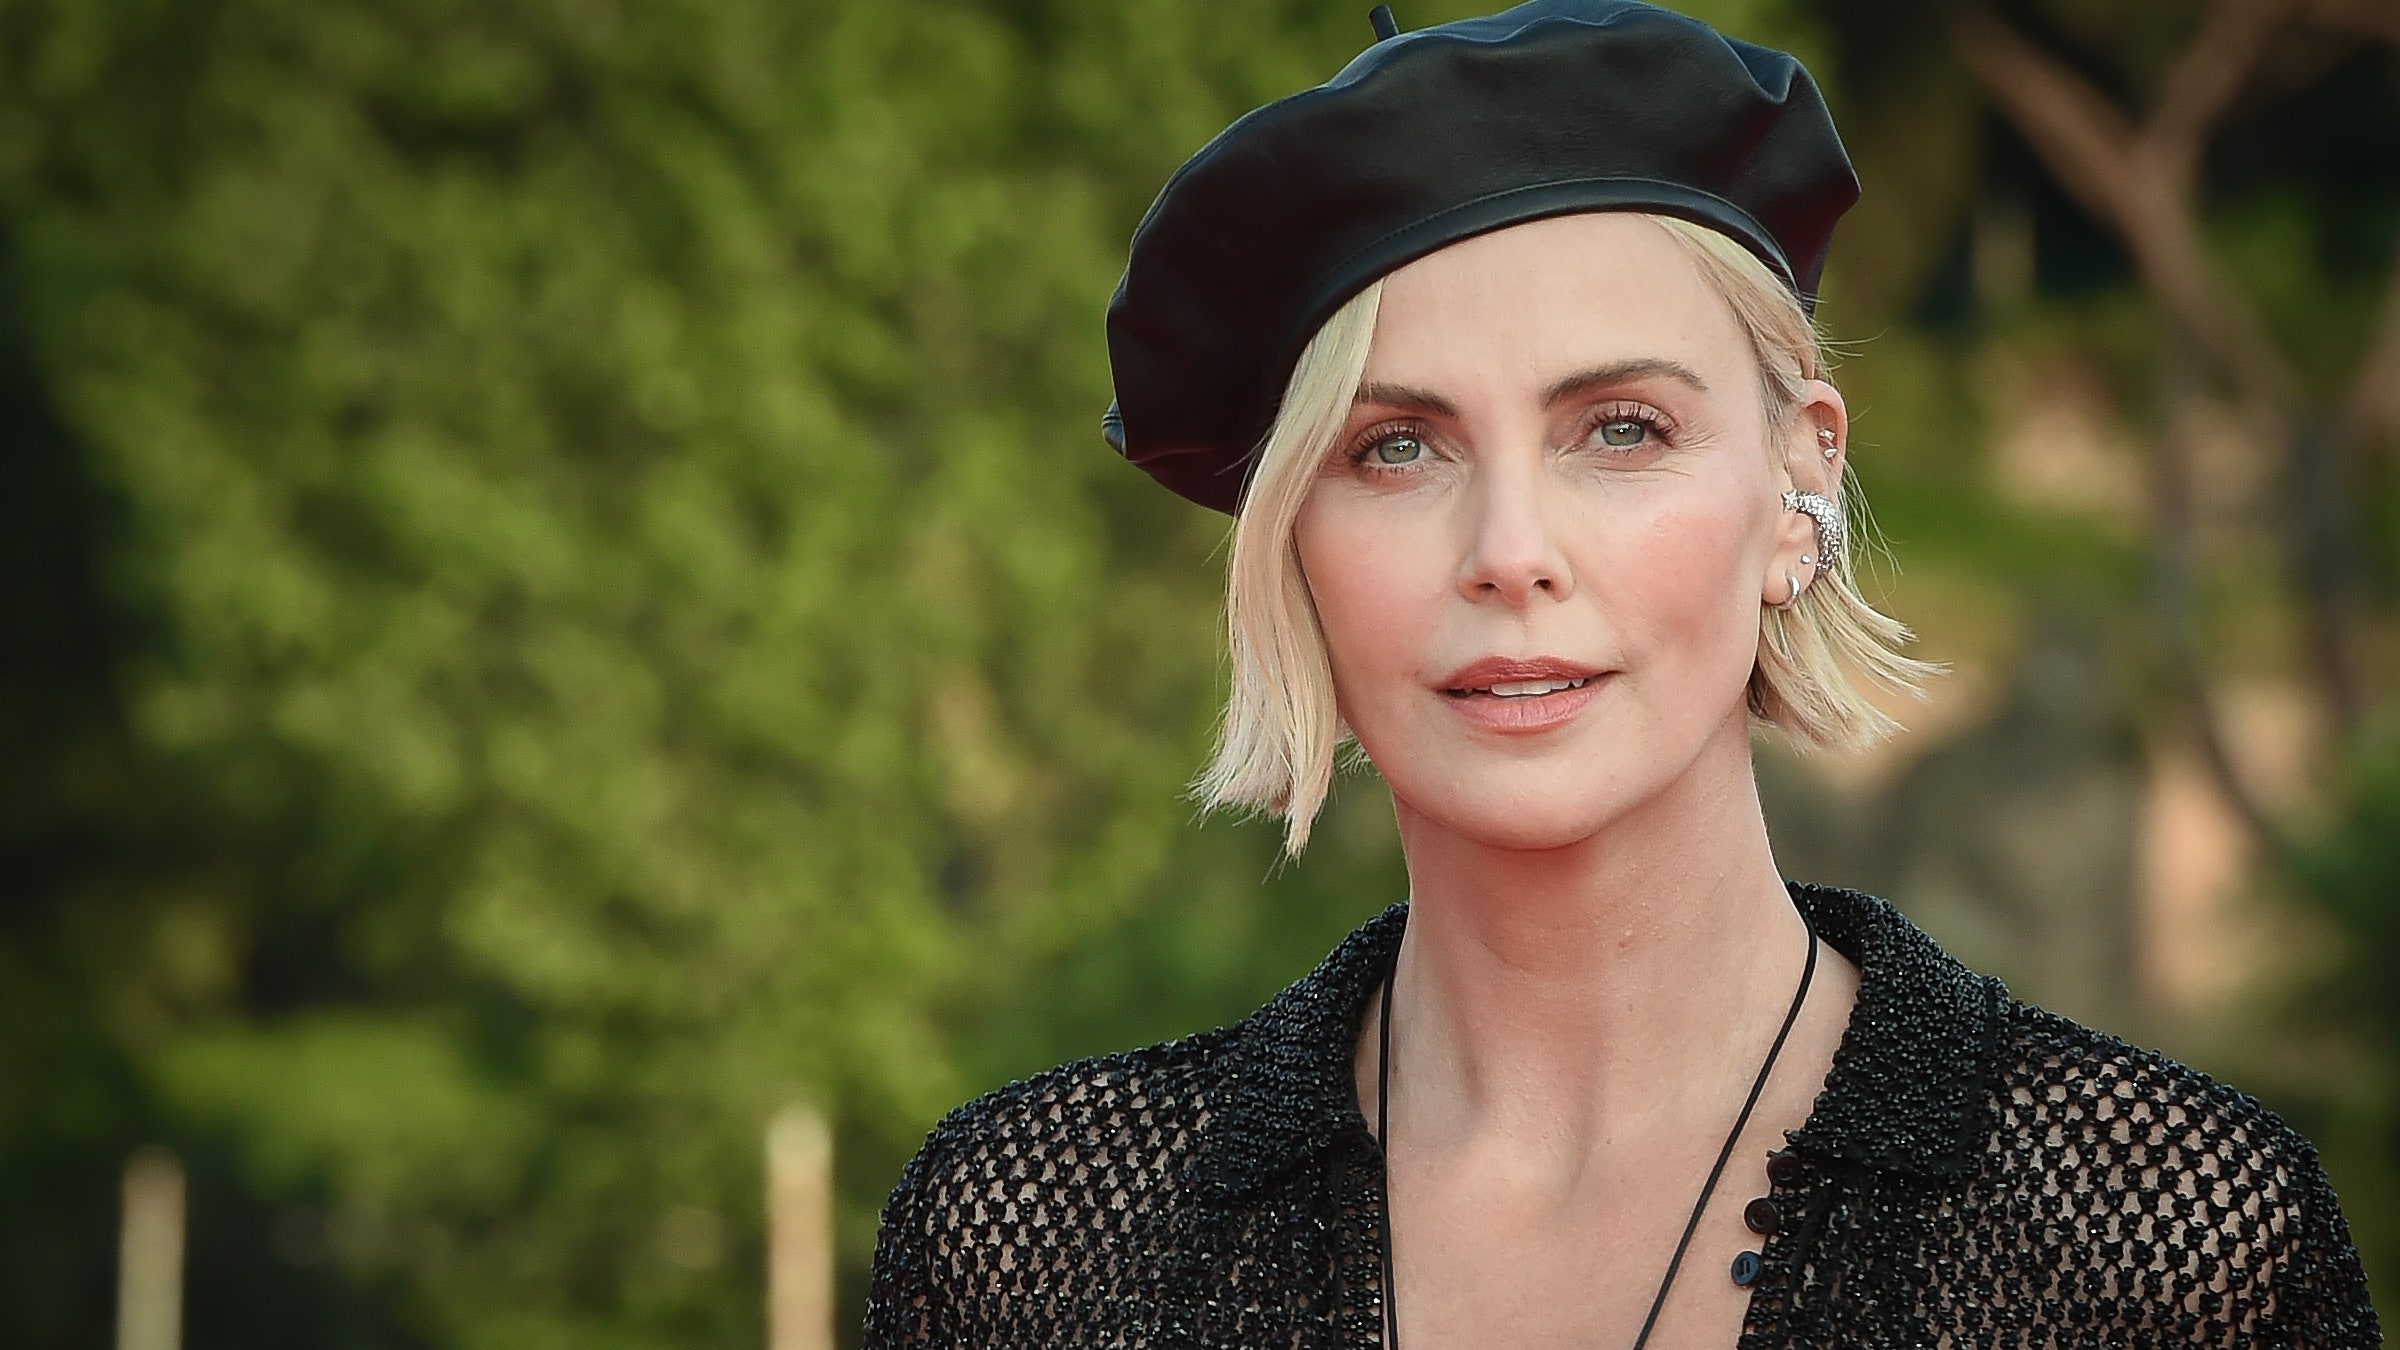 darren pears recommends Charlize Theron Look Alikes